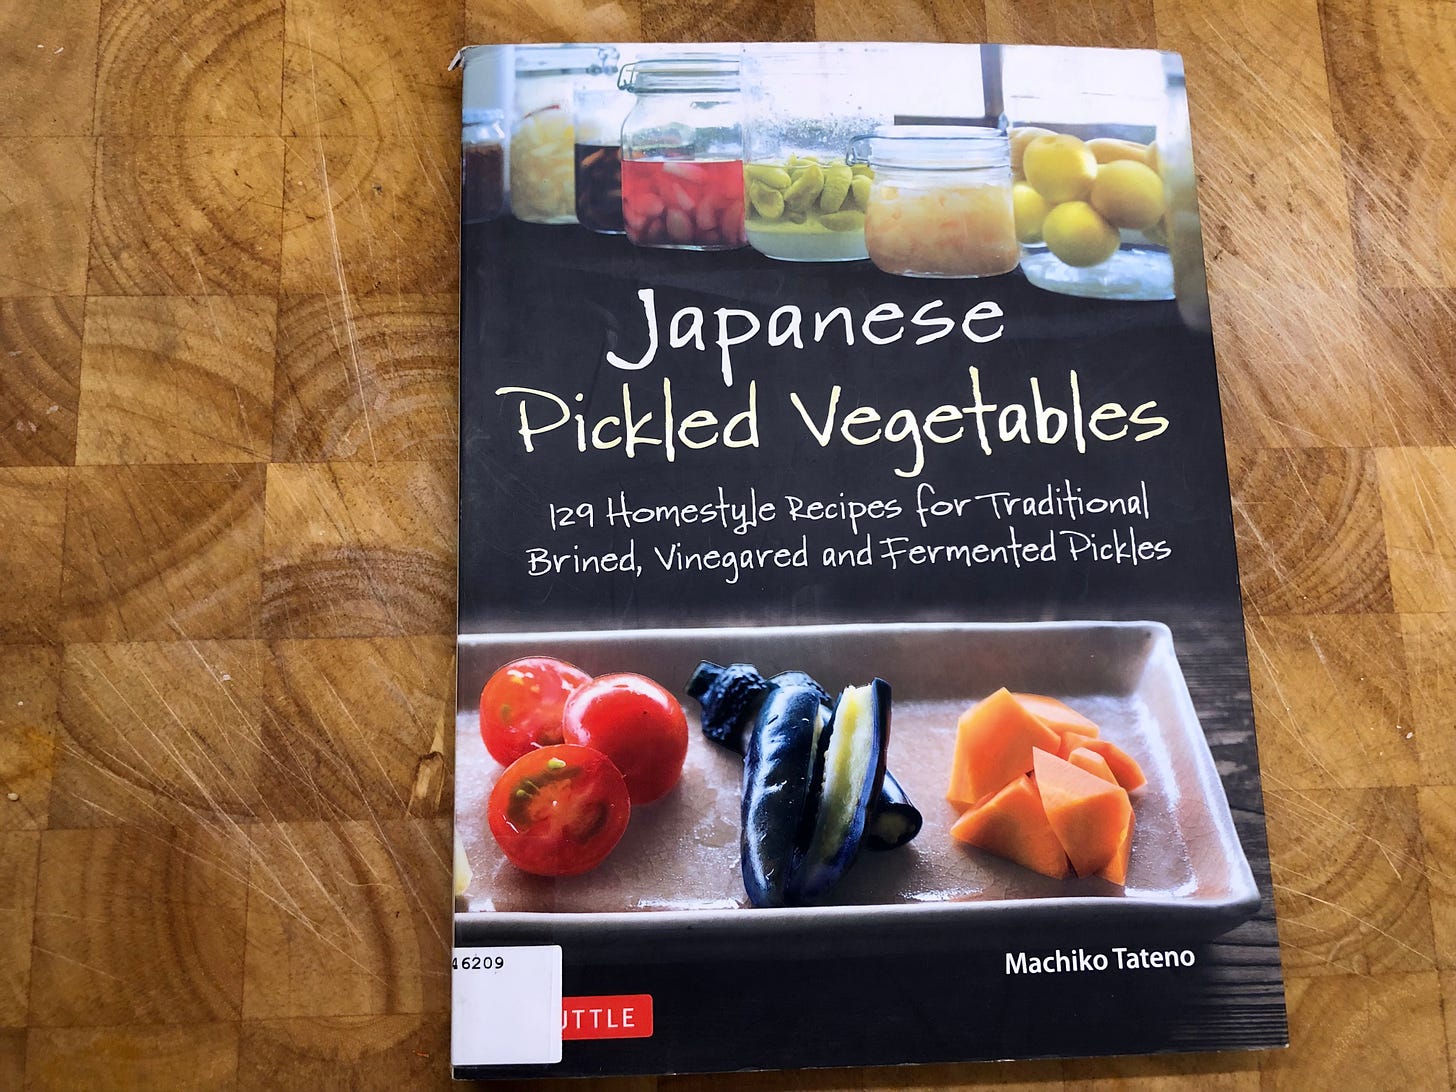 A copy of Michiko Tateno's book "Japanese Pickled Vegetables: 129 Homestyle Recipes for Traditional Brined, Vinegared, and Fermented Pickles